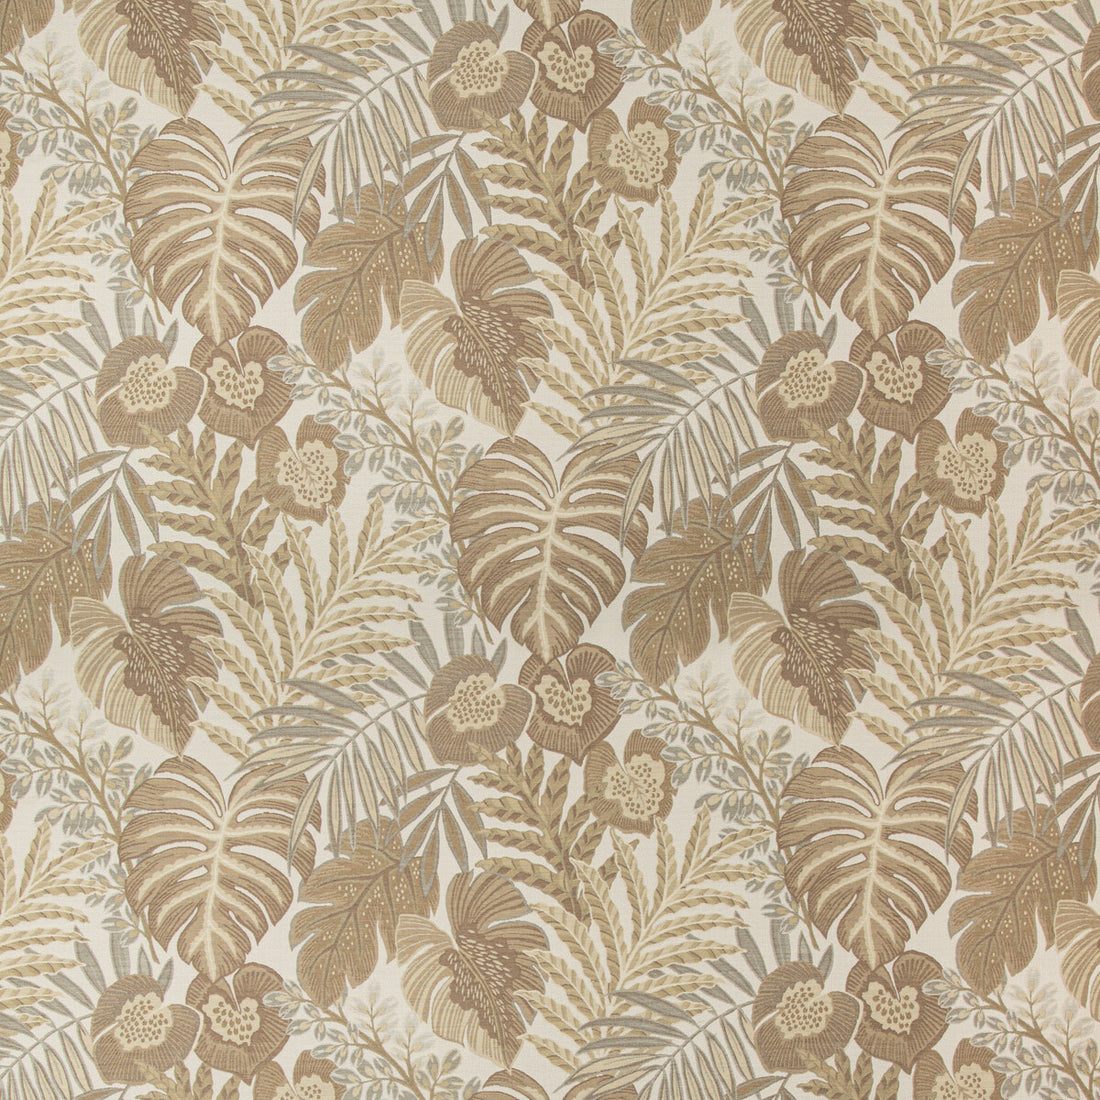 Sanur fabric in beach color - pattern 35824.16.0 - by Kravet Design in the Indoor / Outdoor collection